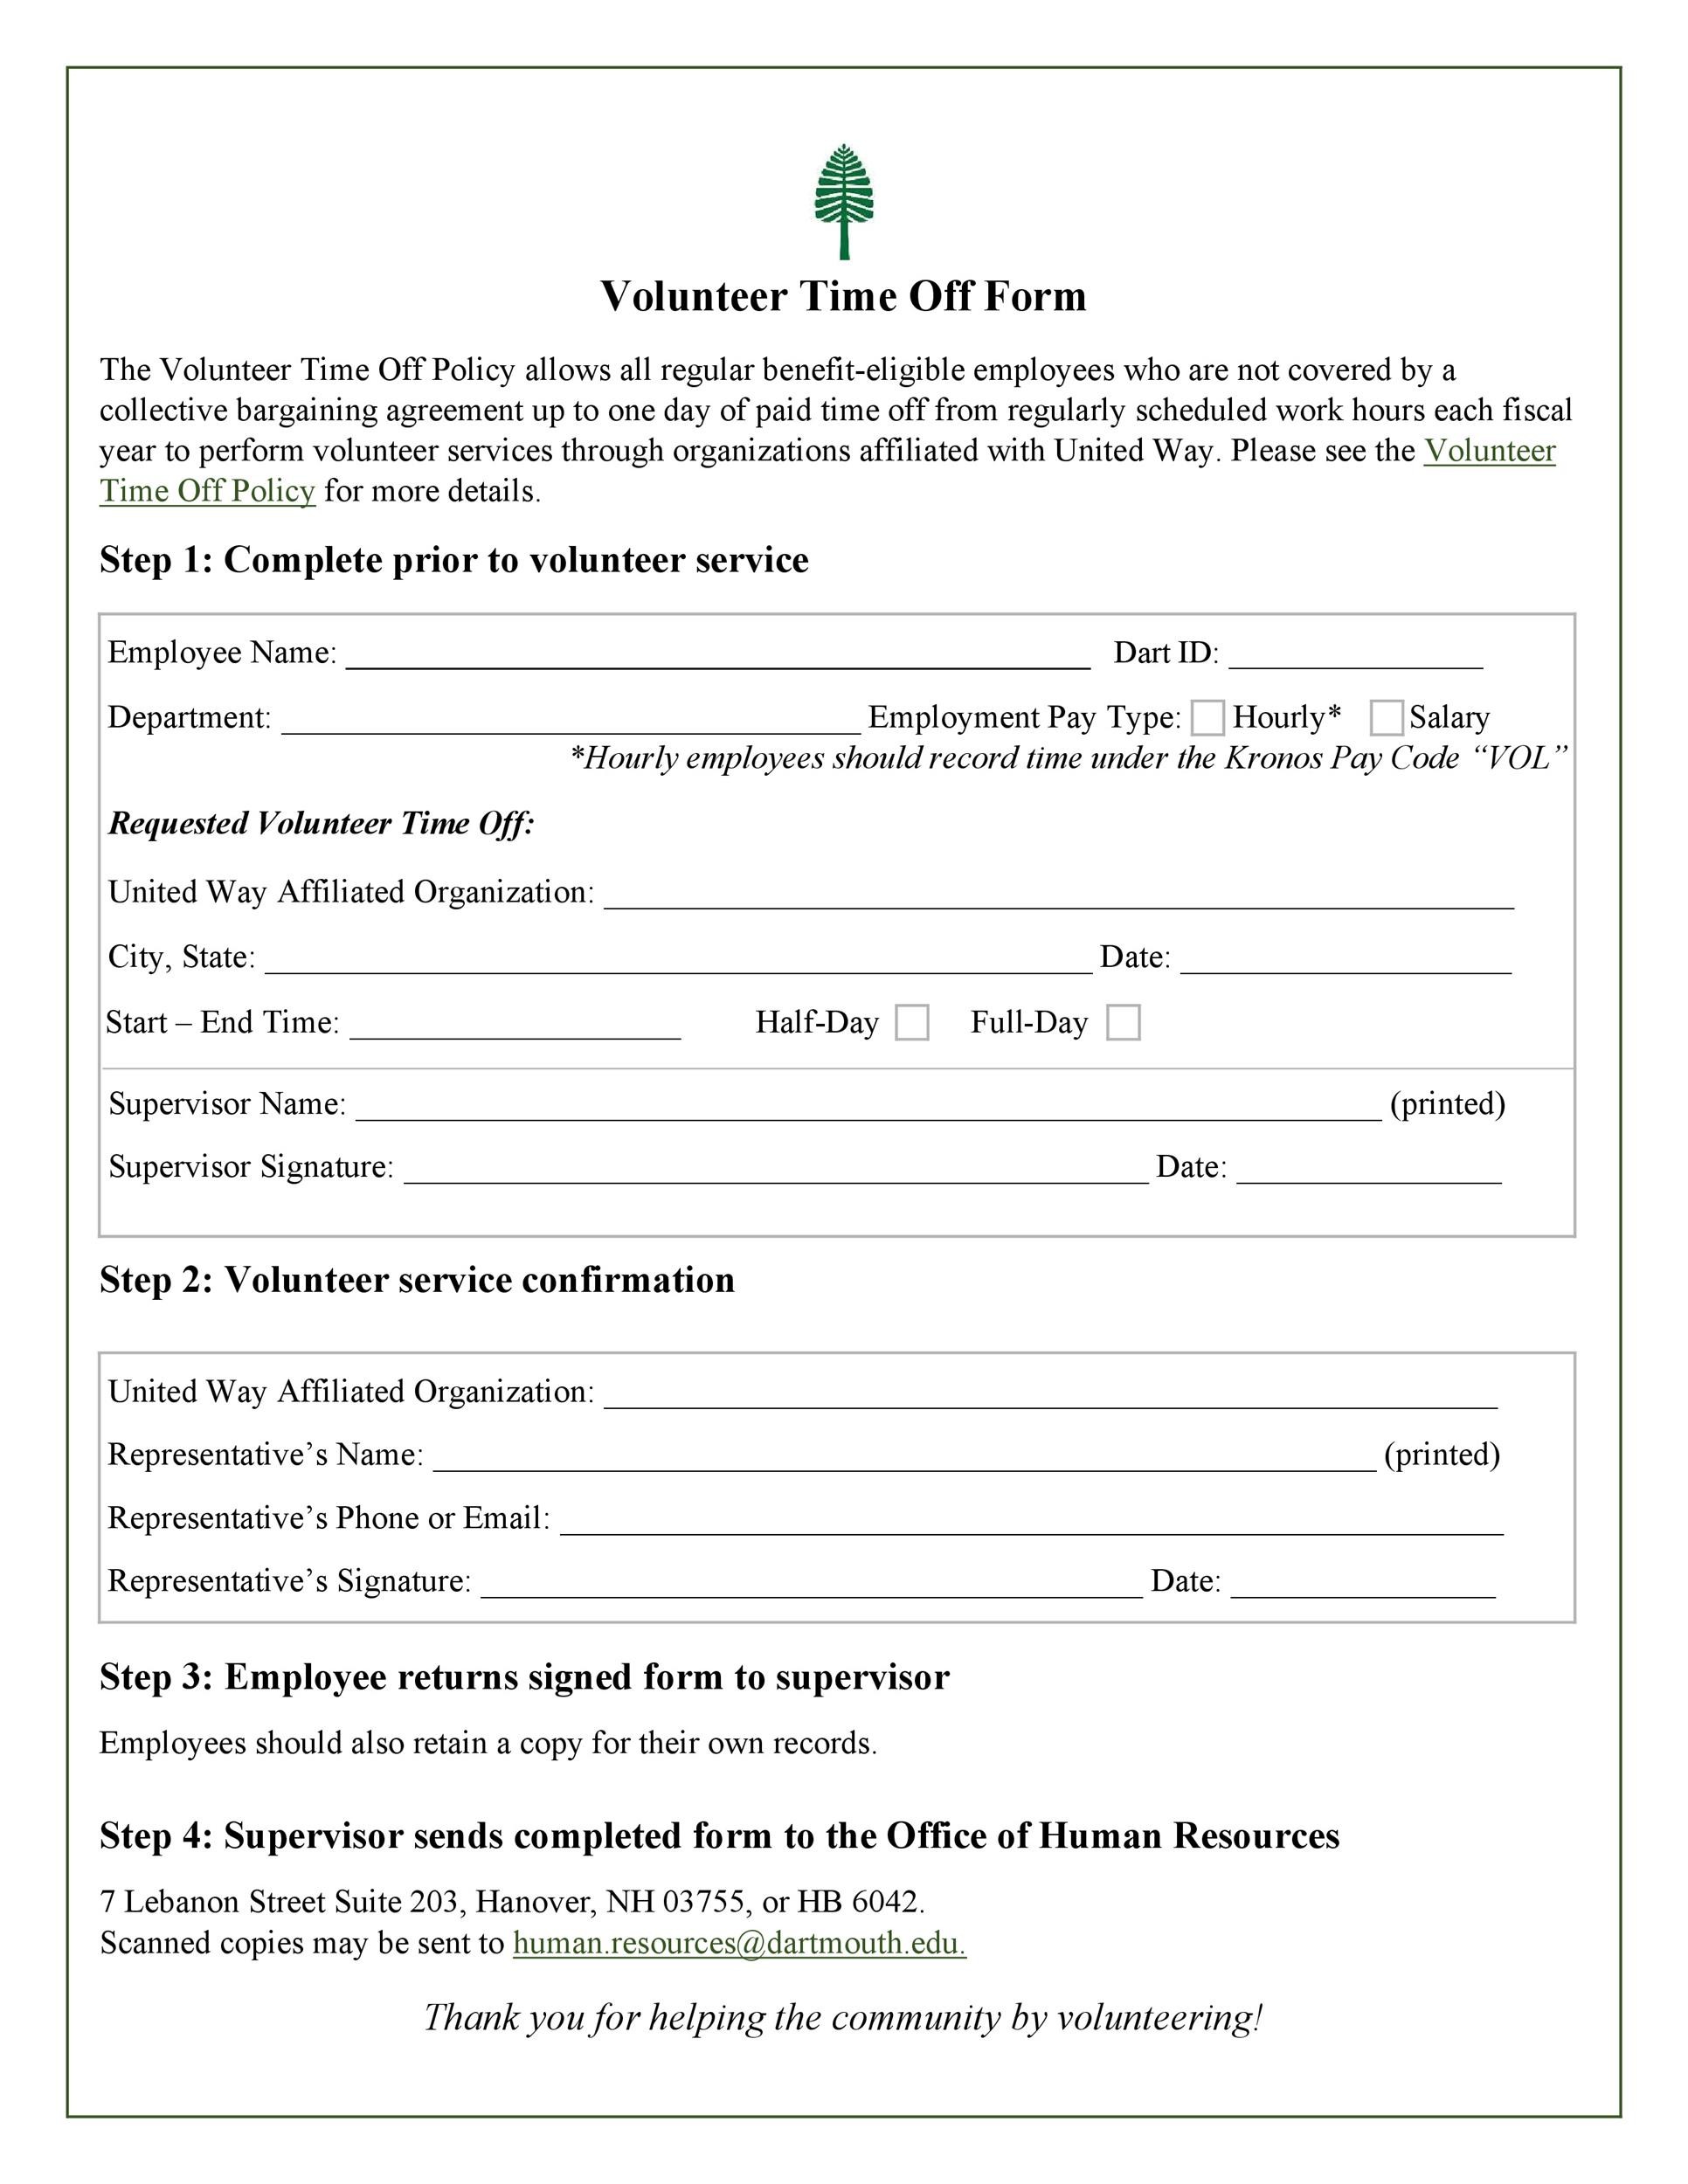  Day off request form template